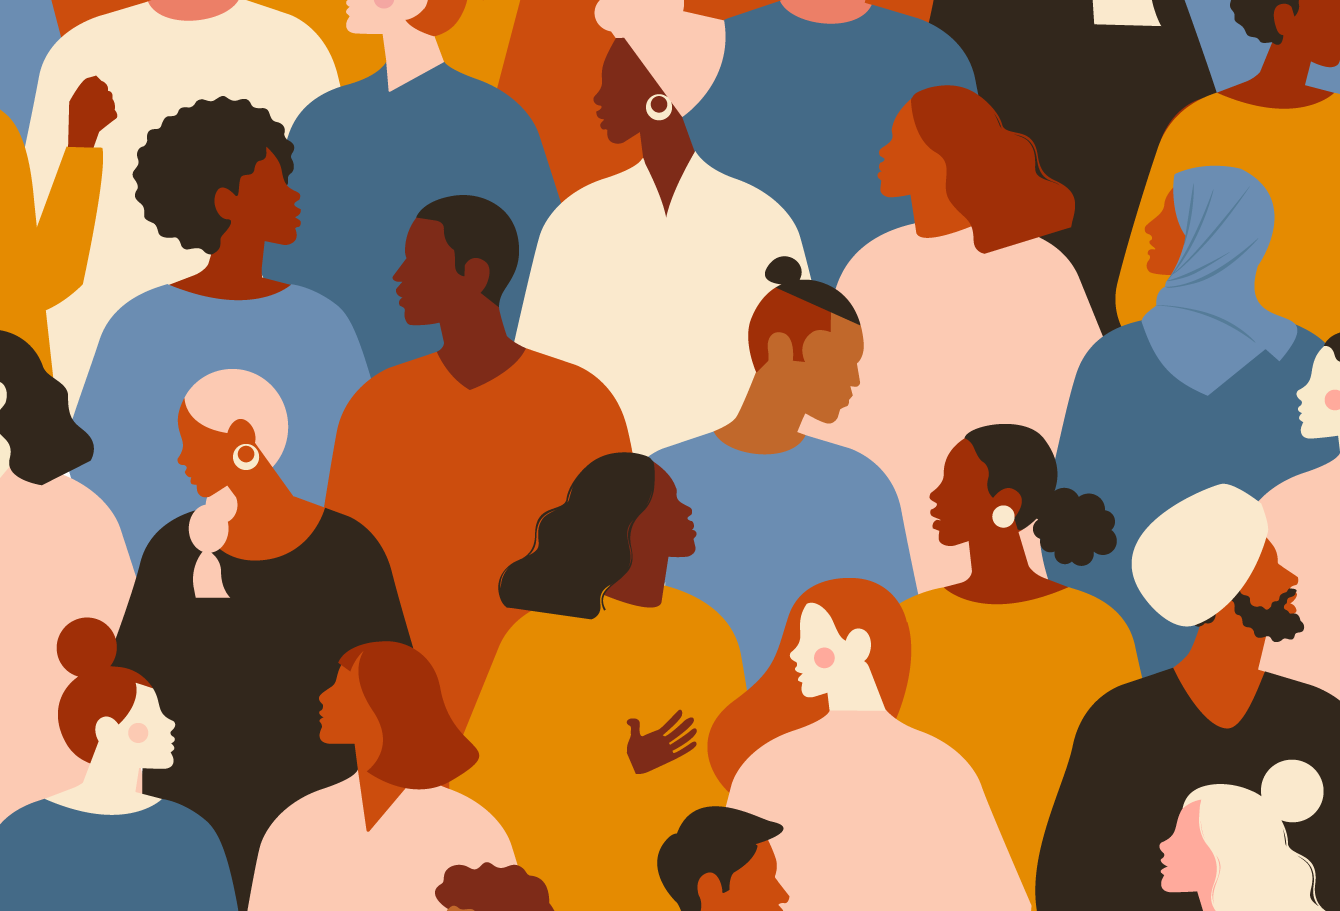 Illustrations of a diverse group of people